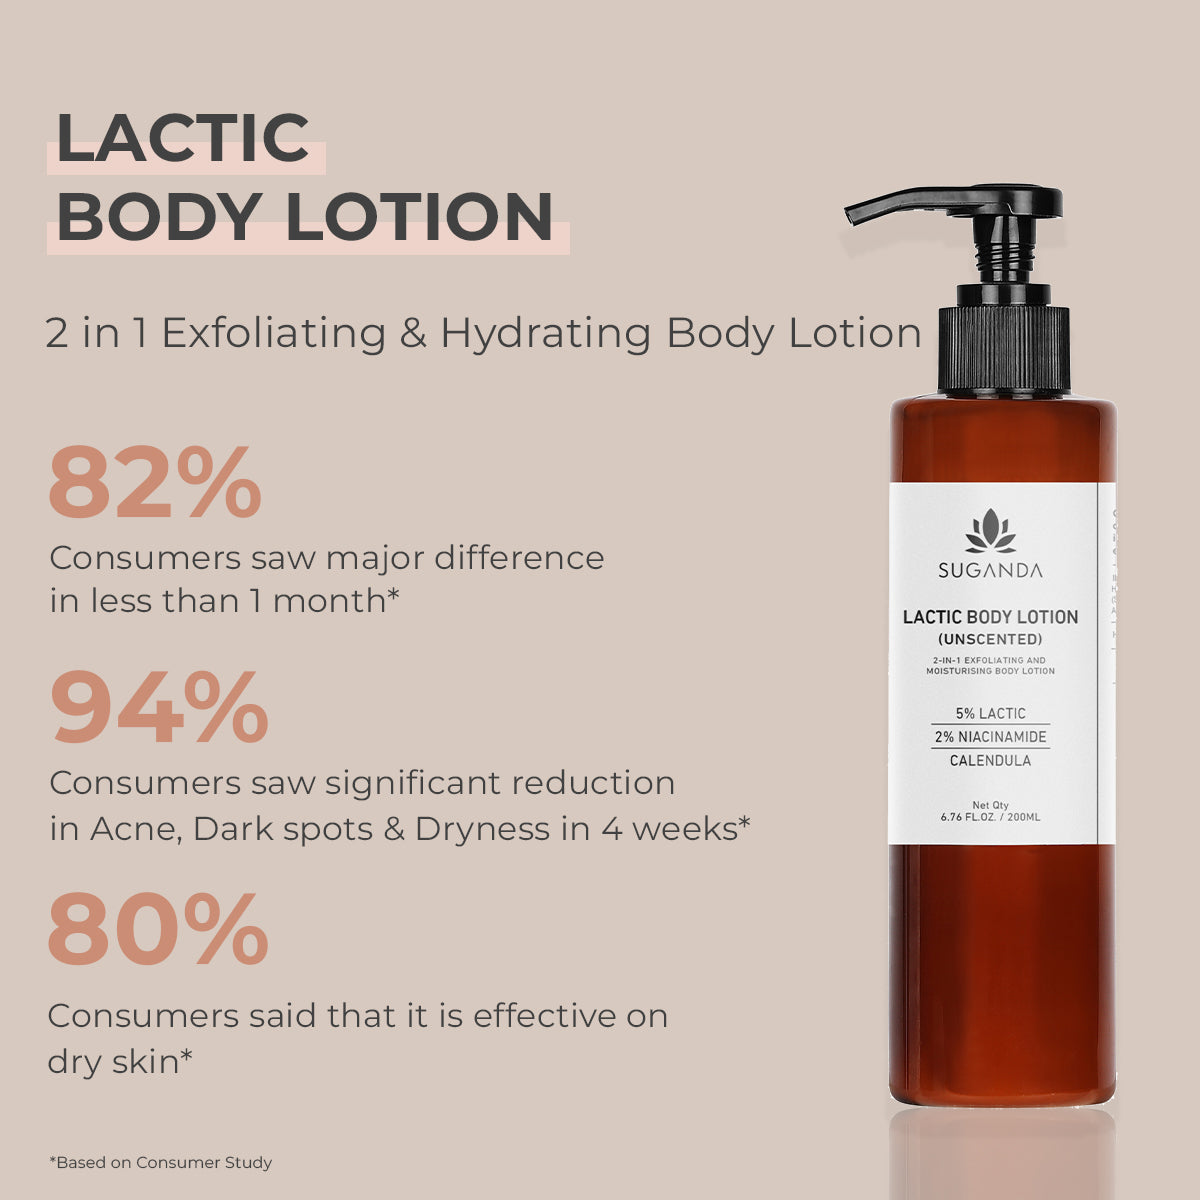 Lactic Body Lotion